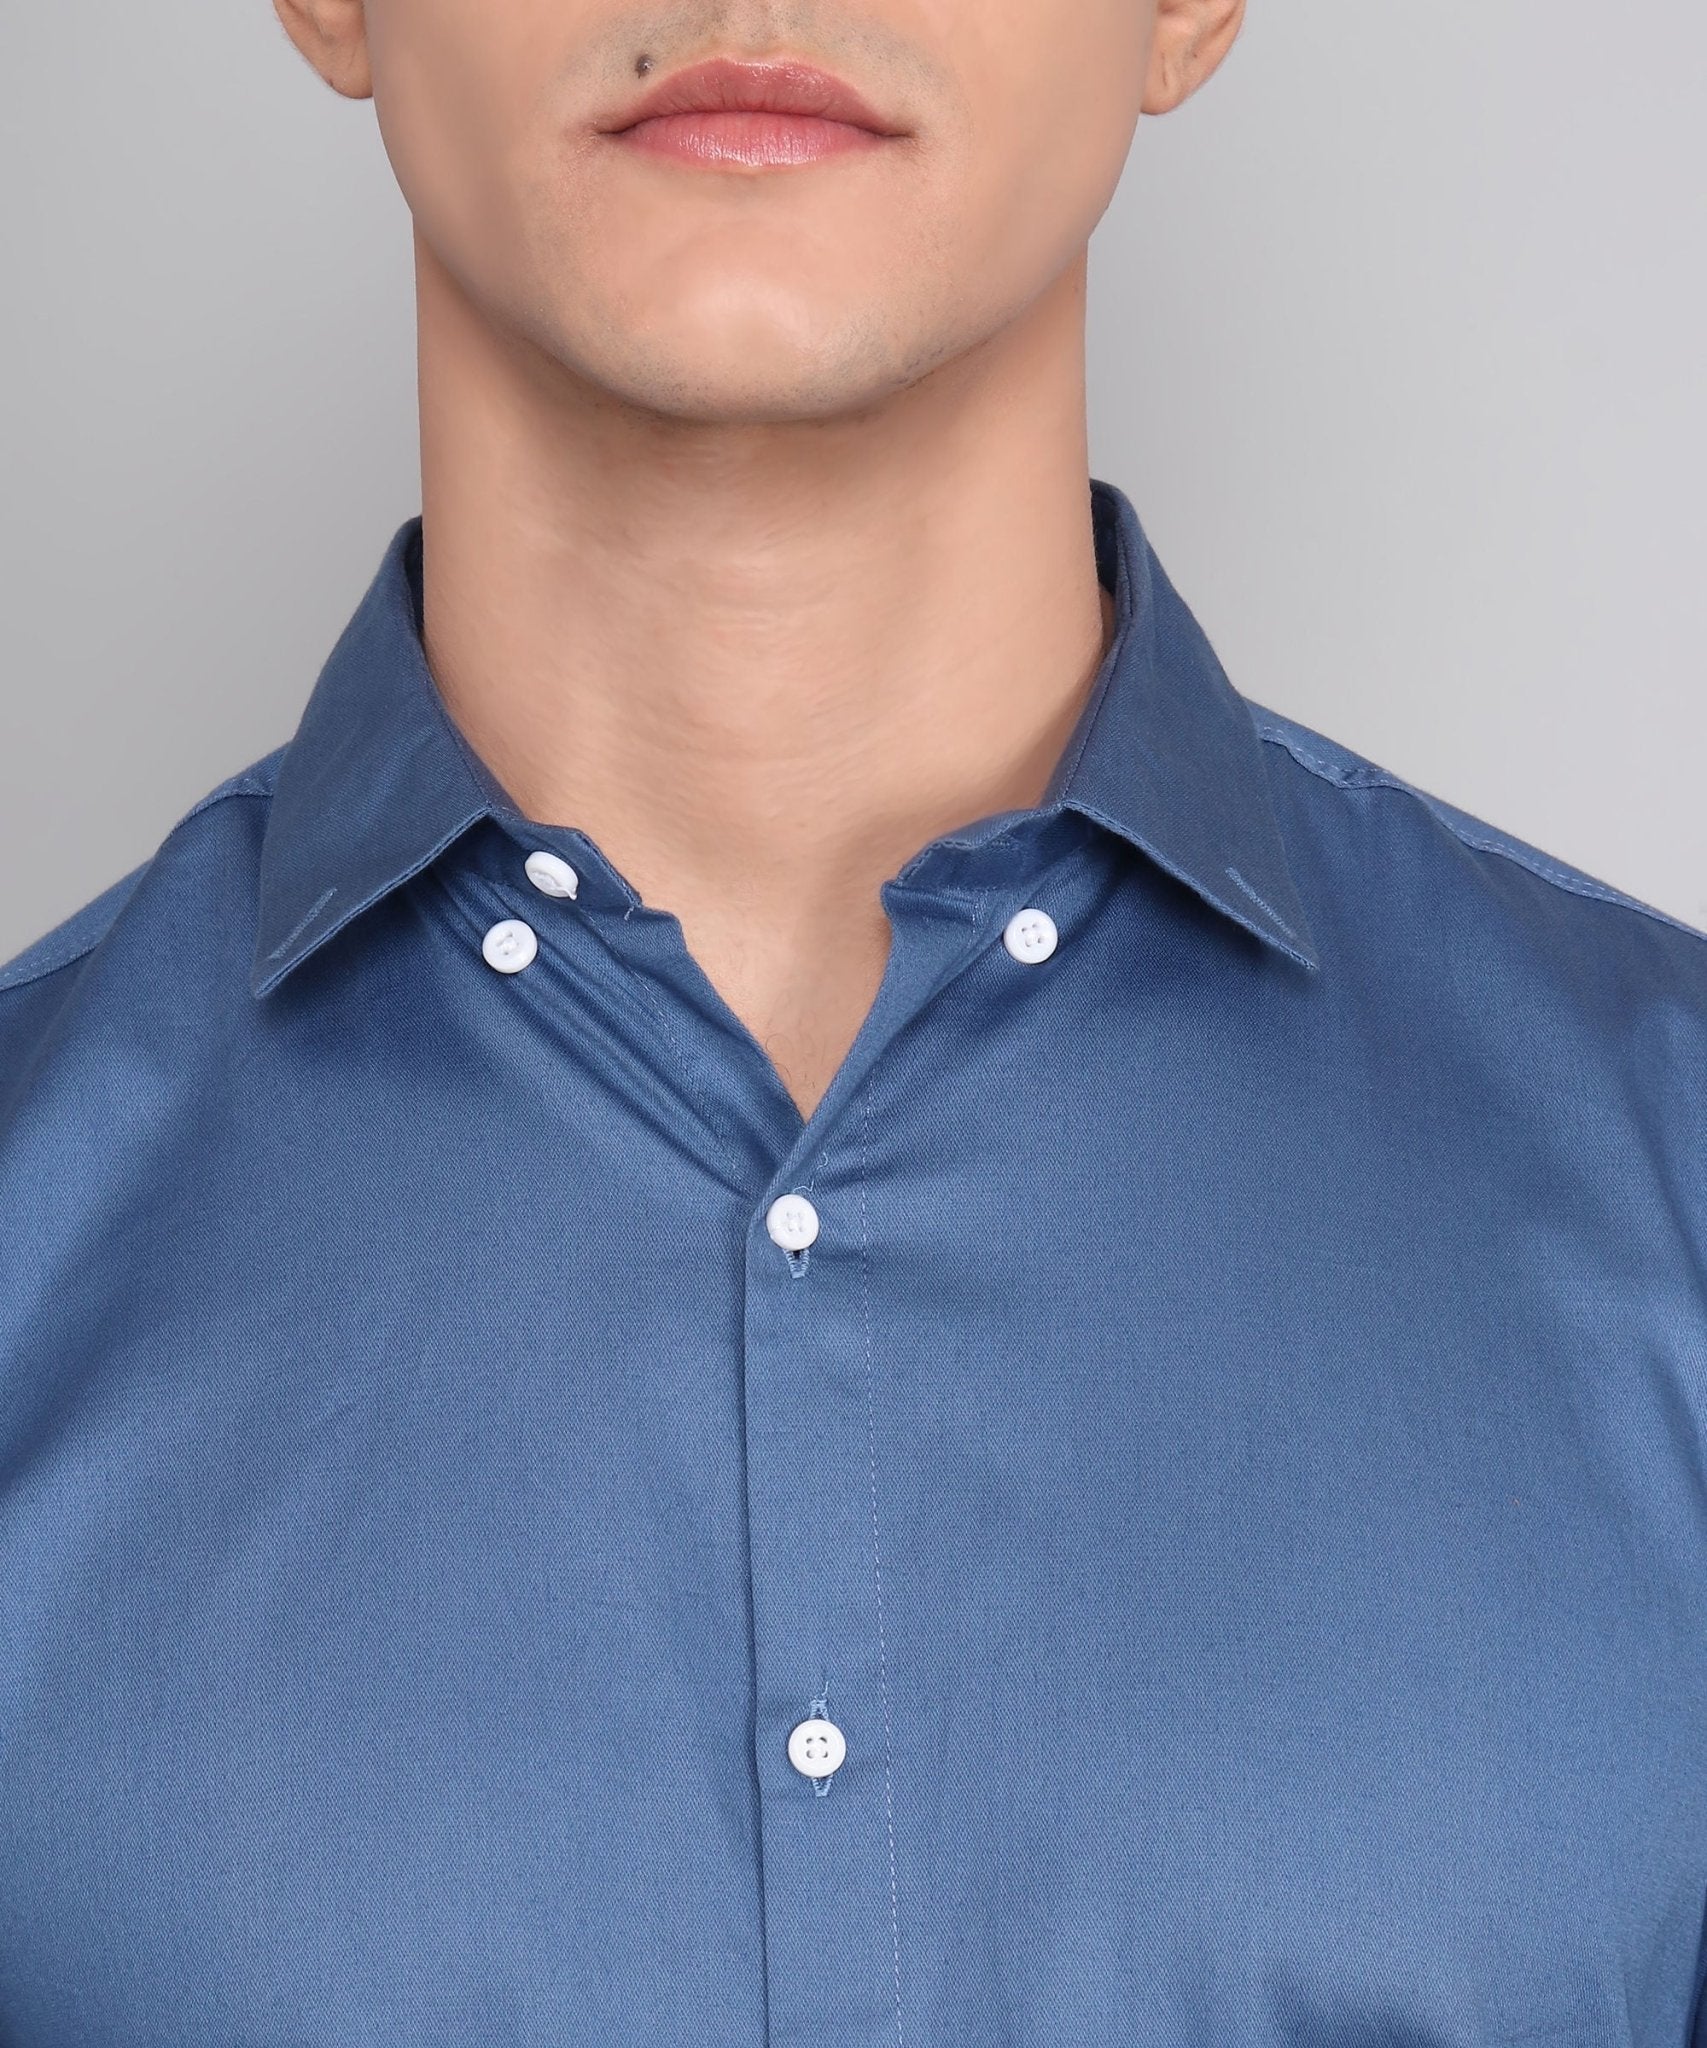 Exclusive TryBuy Premium Blue Casual/Formal Shirt for Men - TryBuy® USA🇺🇸